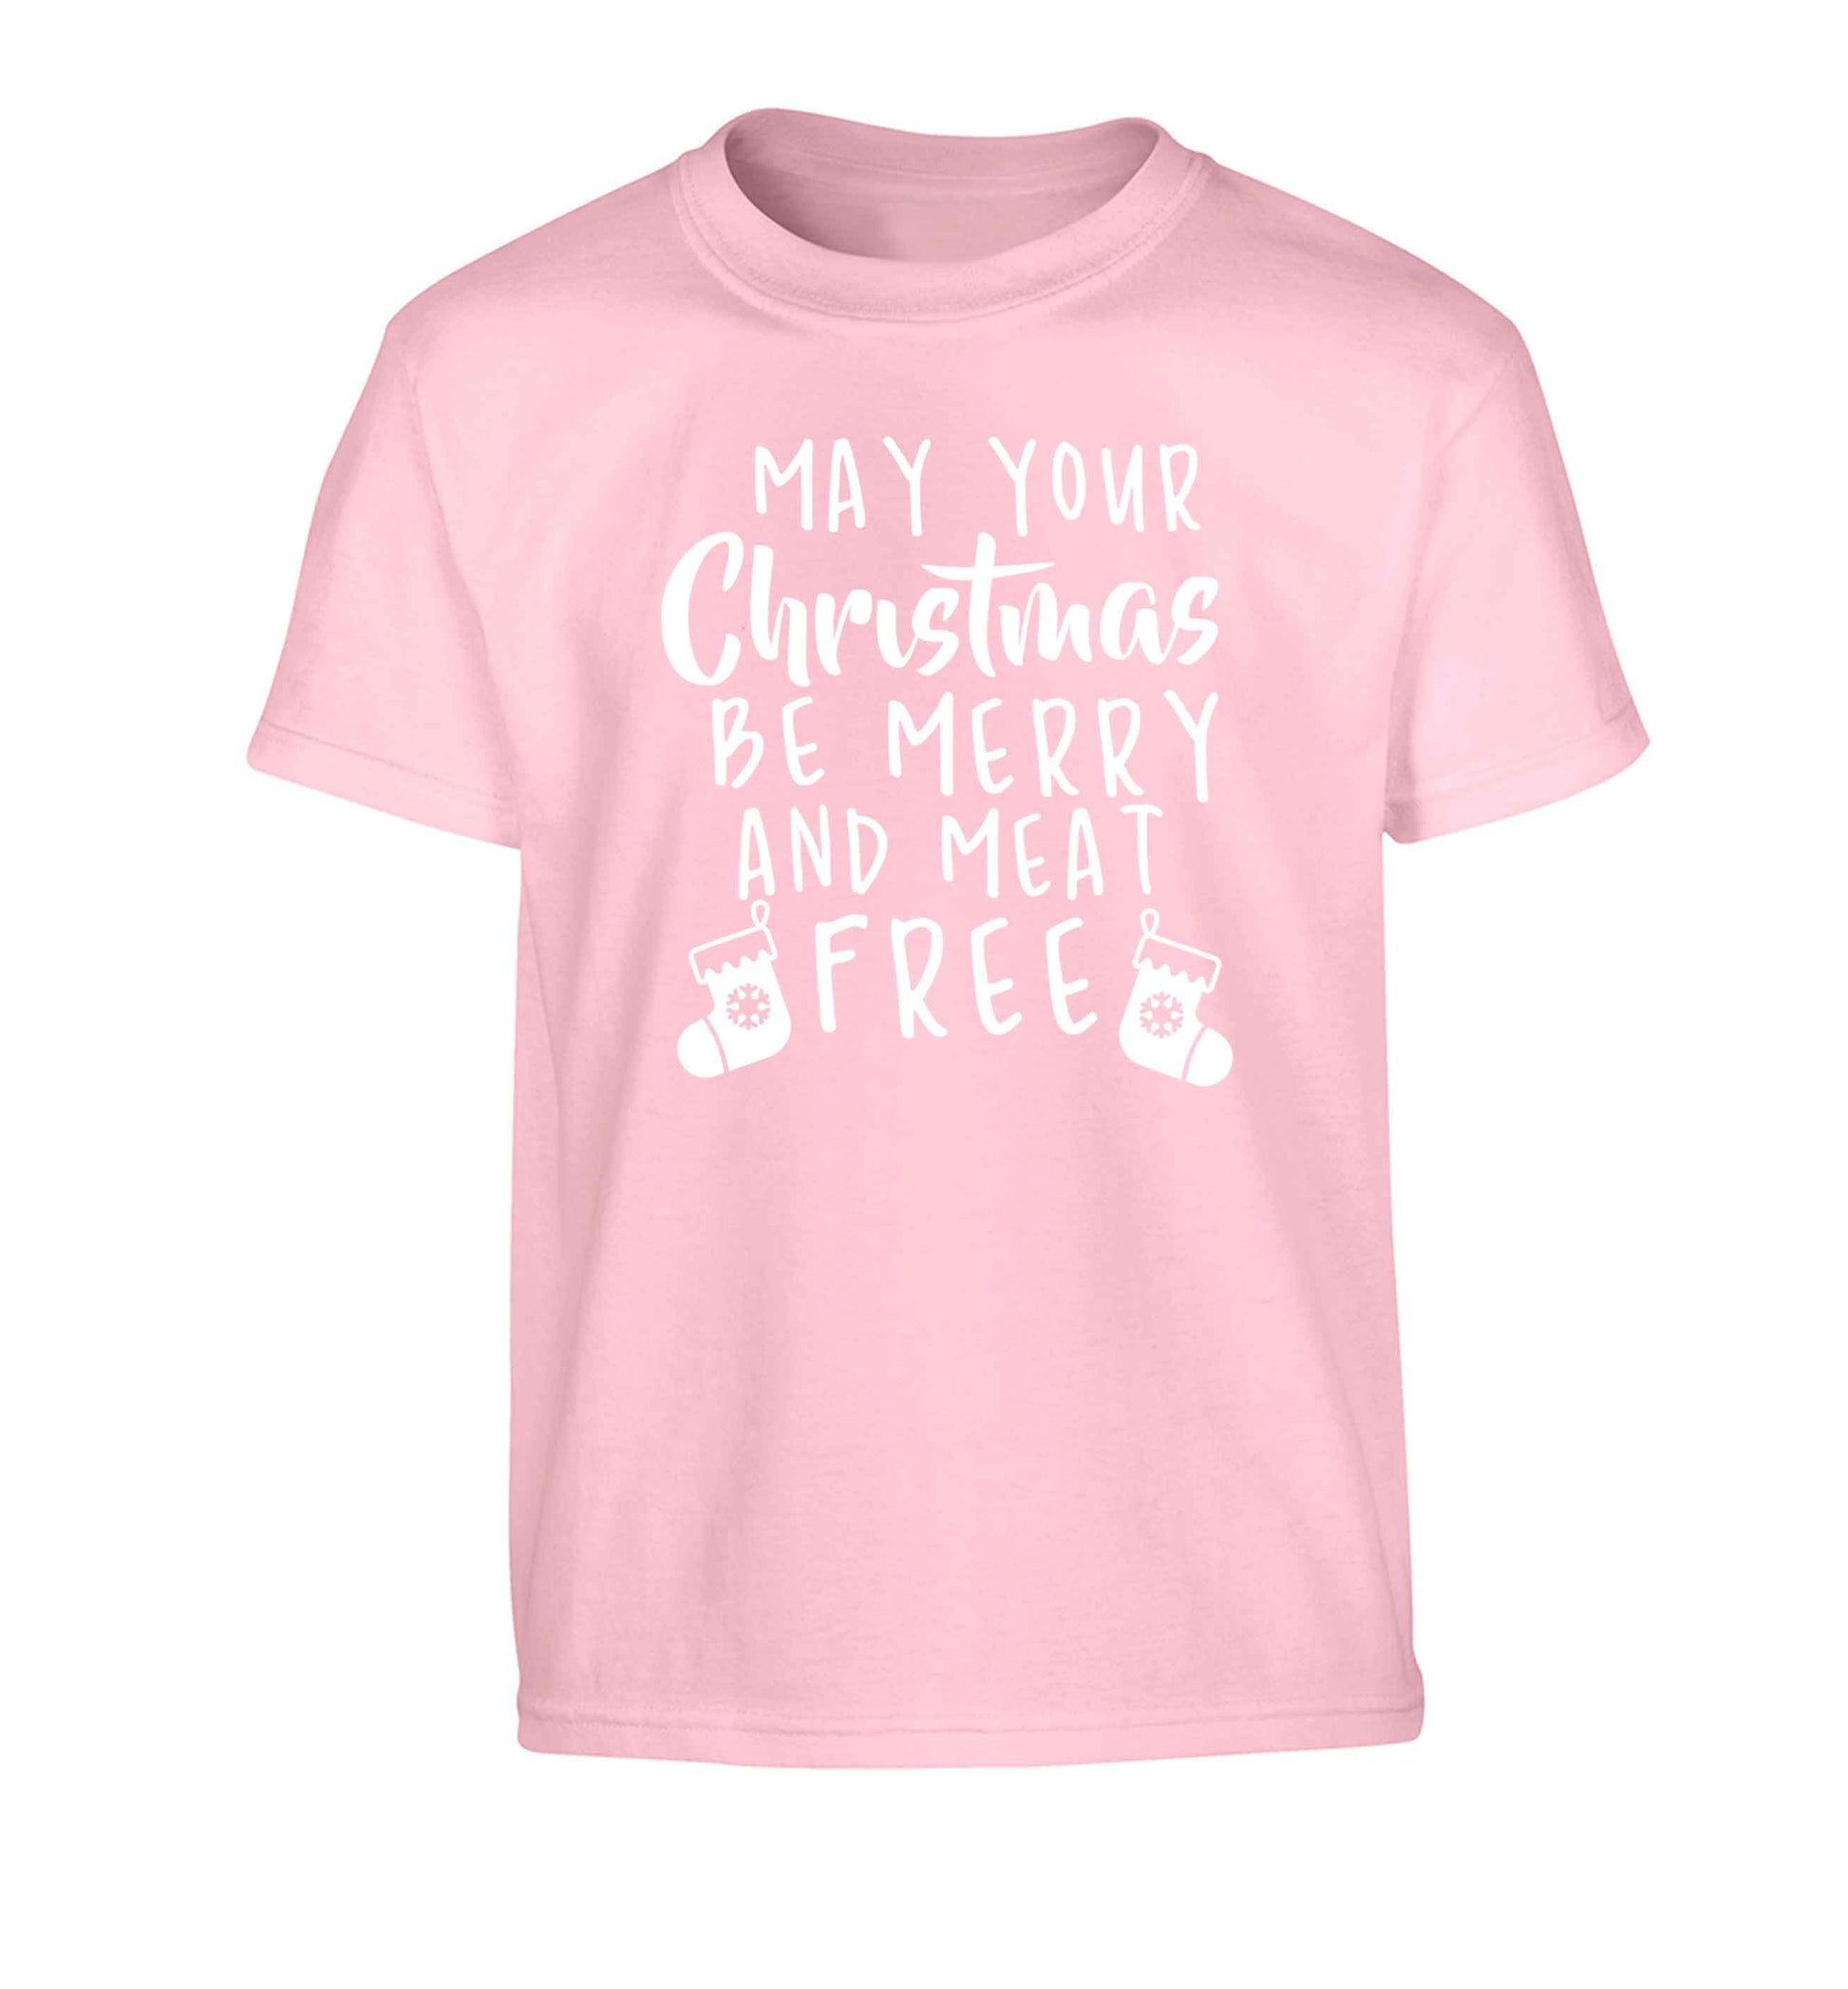 May your Christmas be merry and meat free Children's light pink Tshirt 12-13 Years